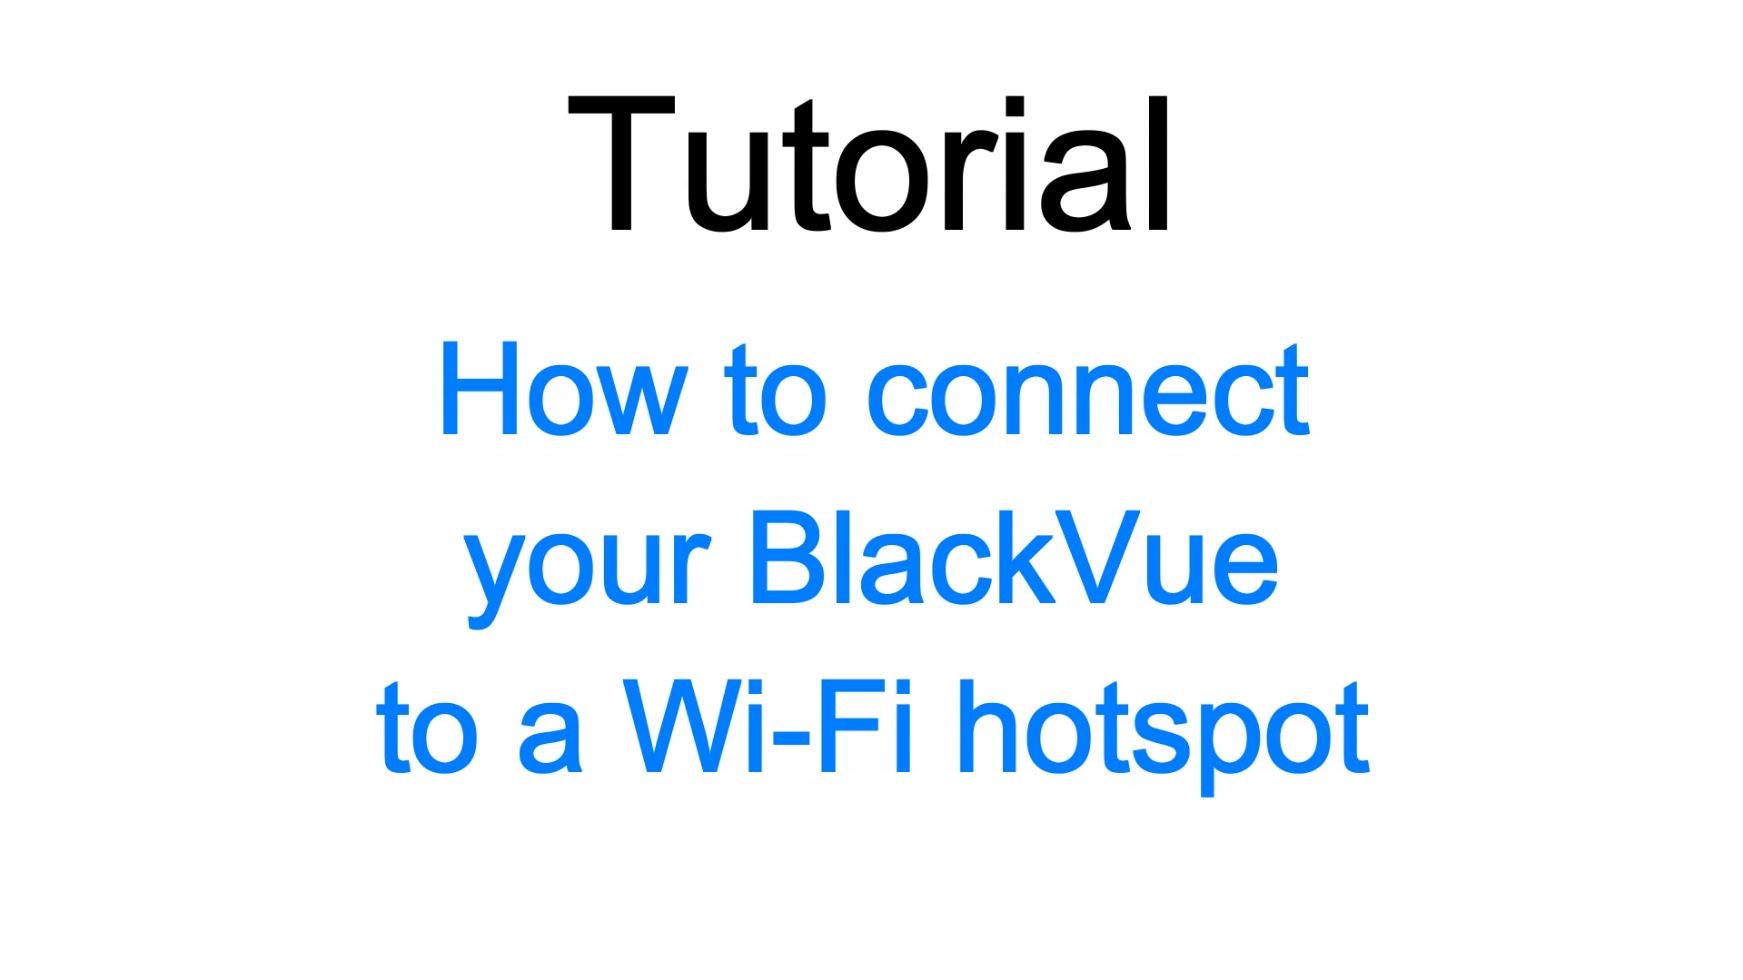 Connect your BlackVue to a Wi-Fi hotspot for Cloud connectivity!